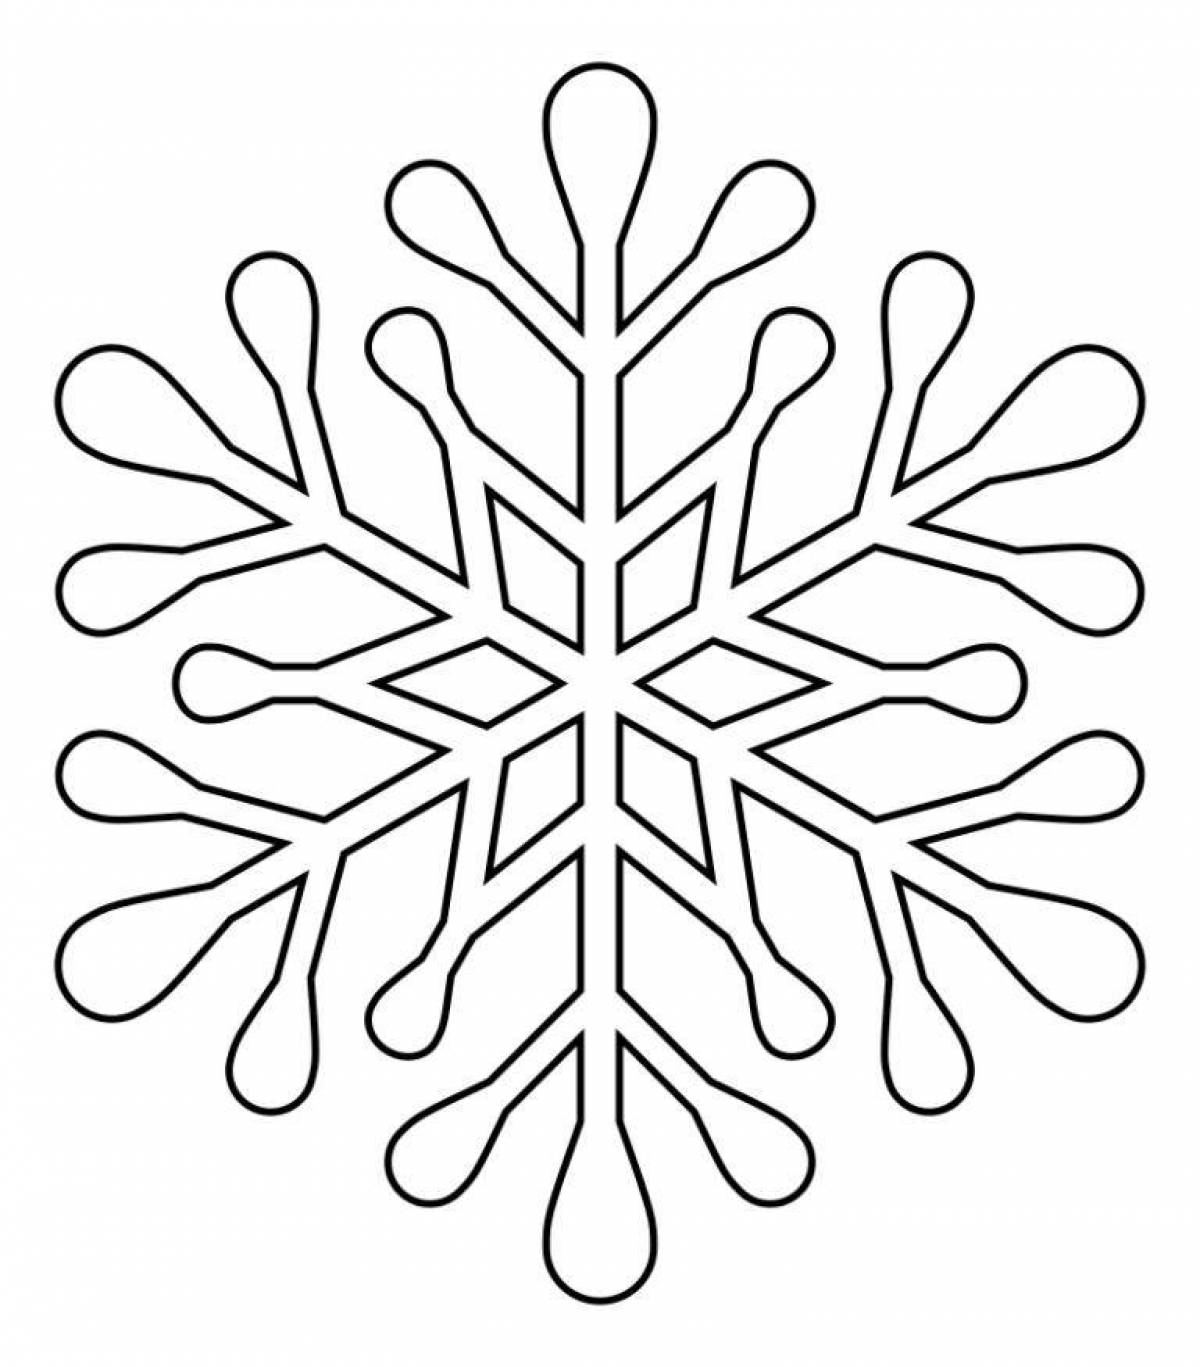 Exquisite snowflake coloring book for 3-4 year olds